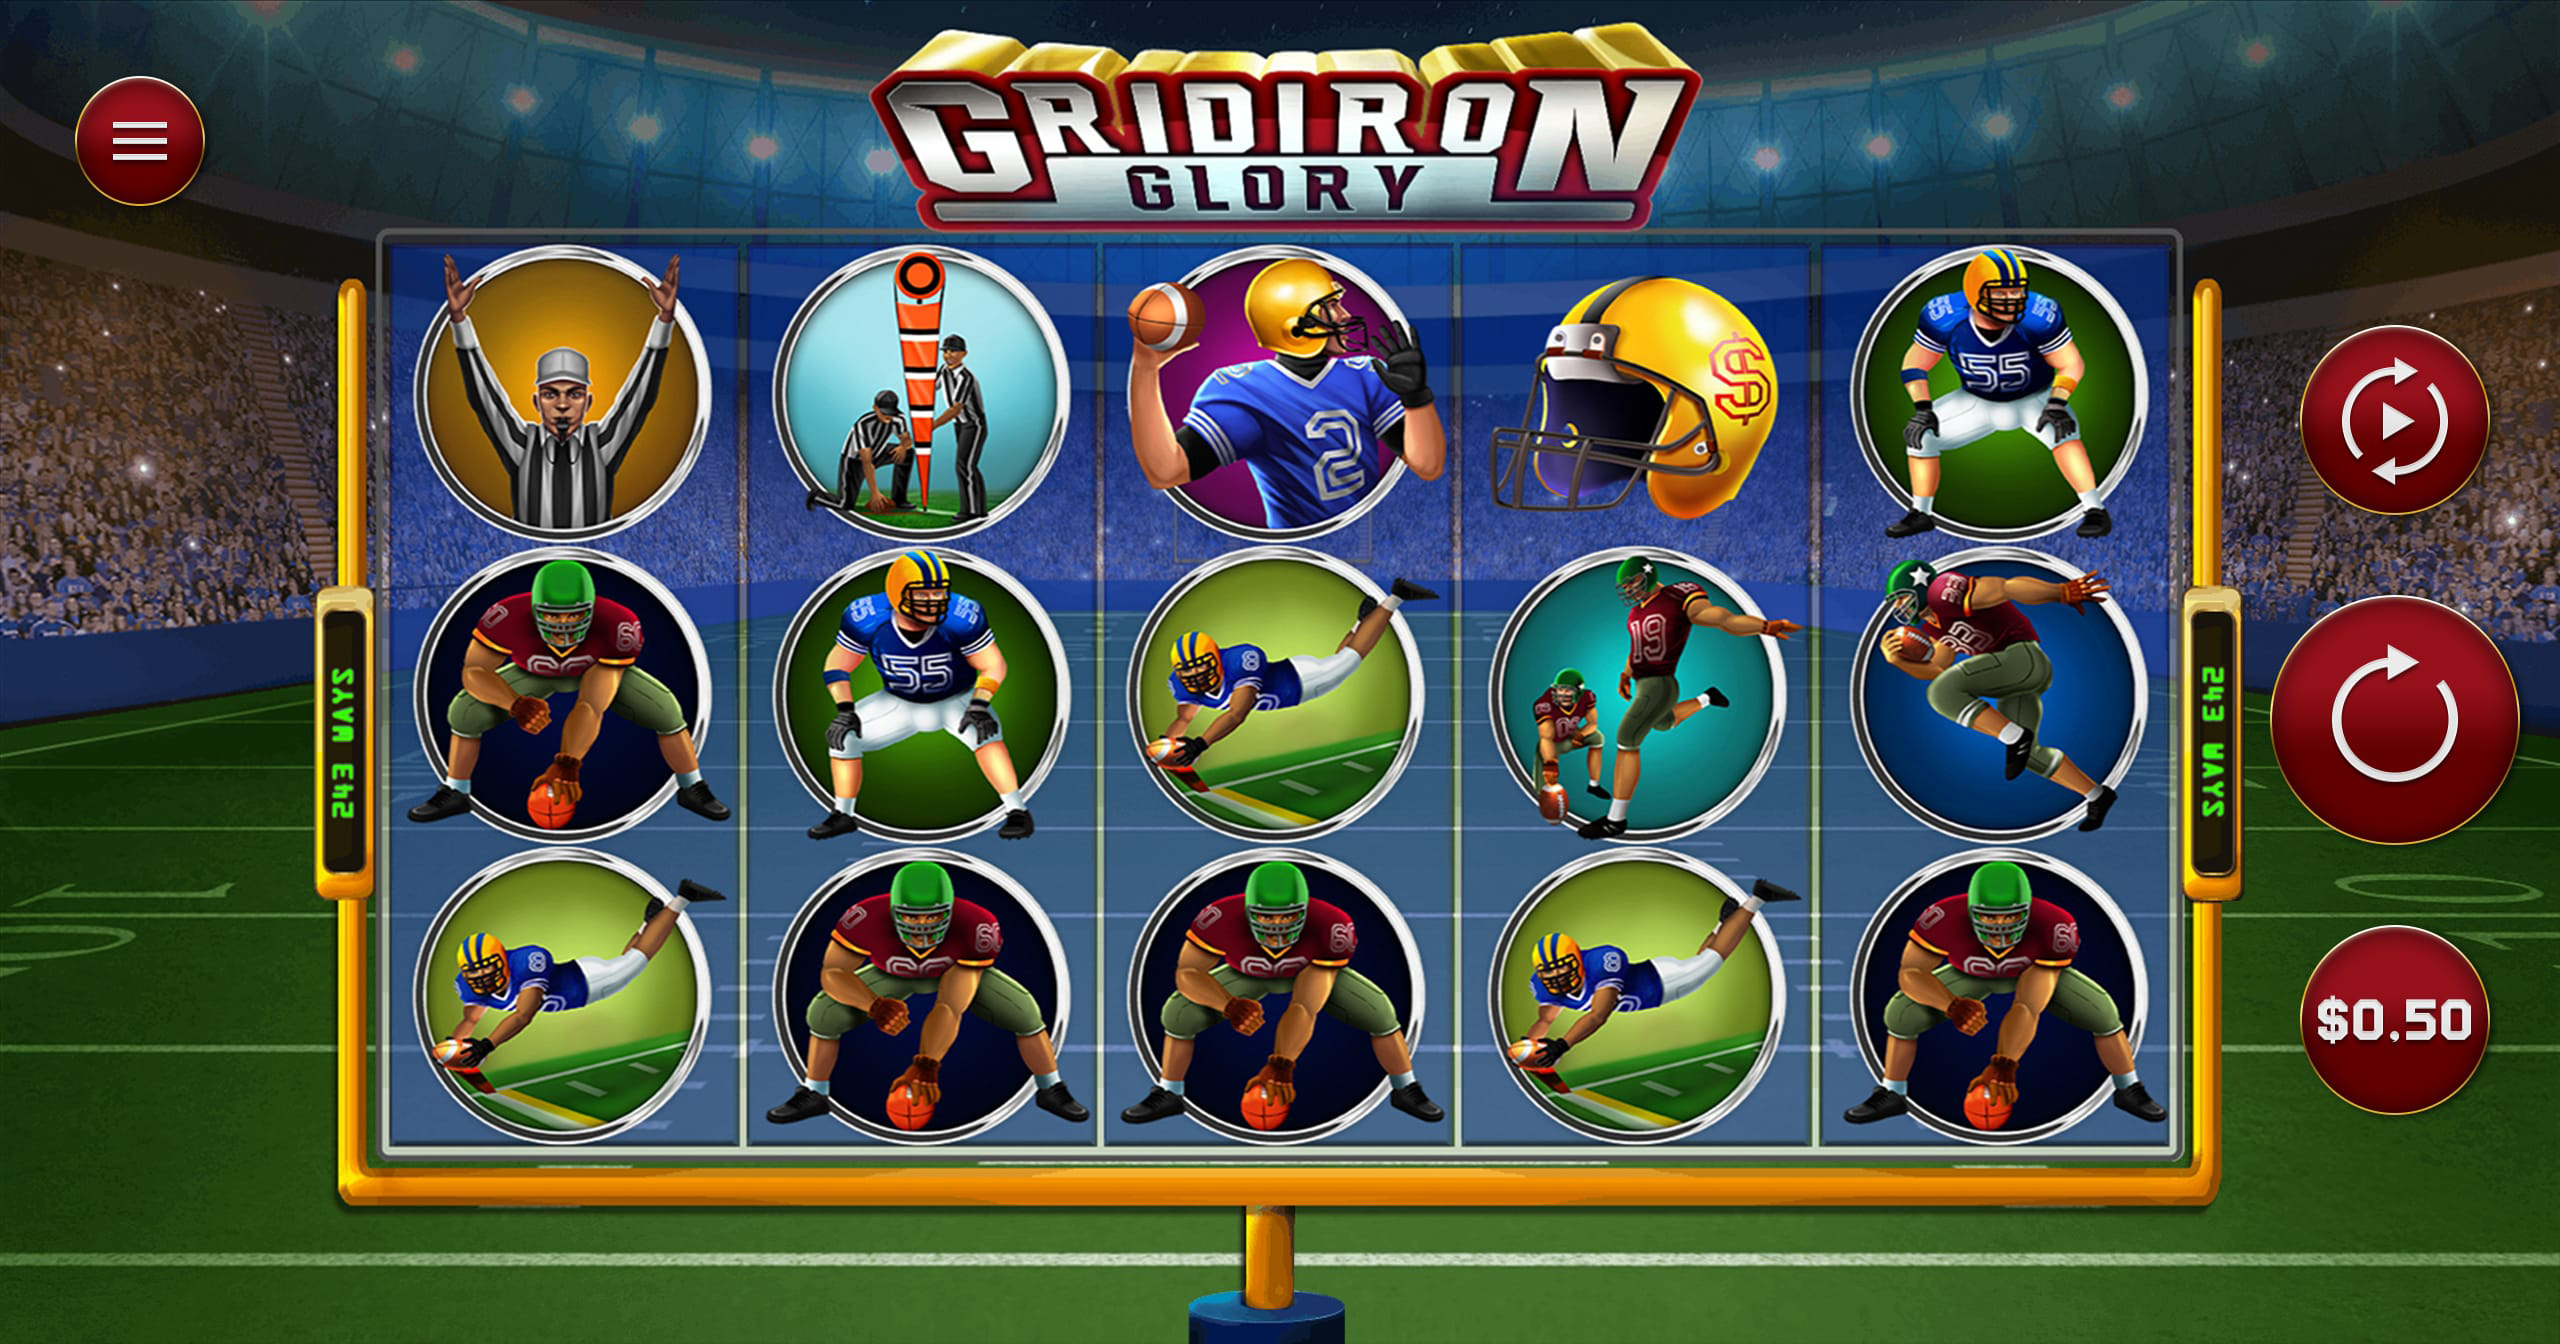 It's time to huddle and learn how to play Gridiron Glory.